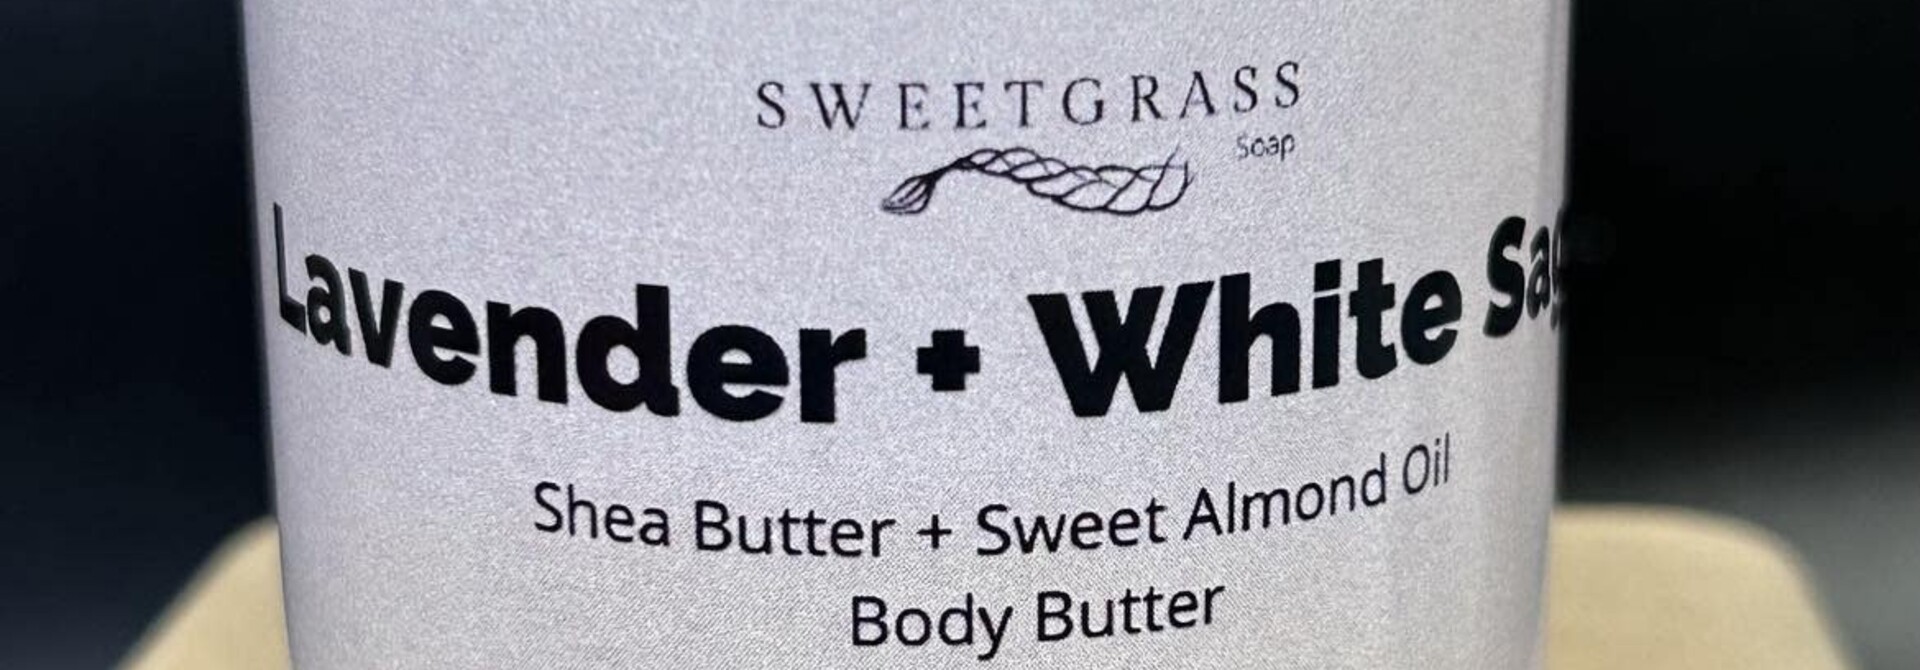 Lavender & White Sage Body Butter by Sweetgrass Soap